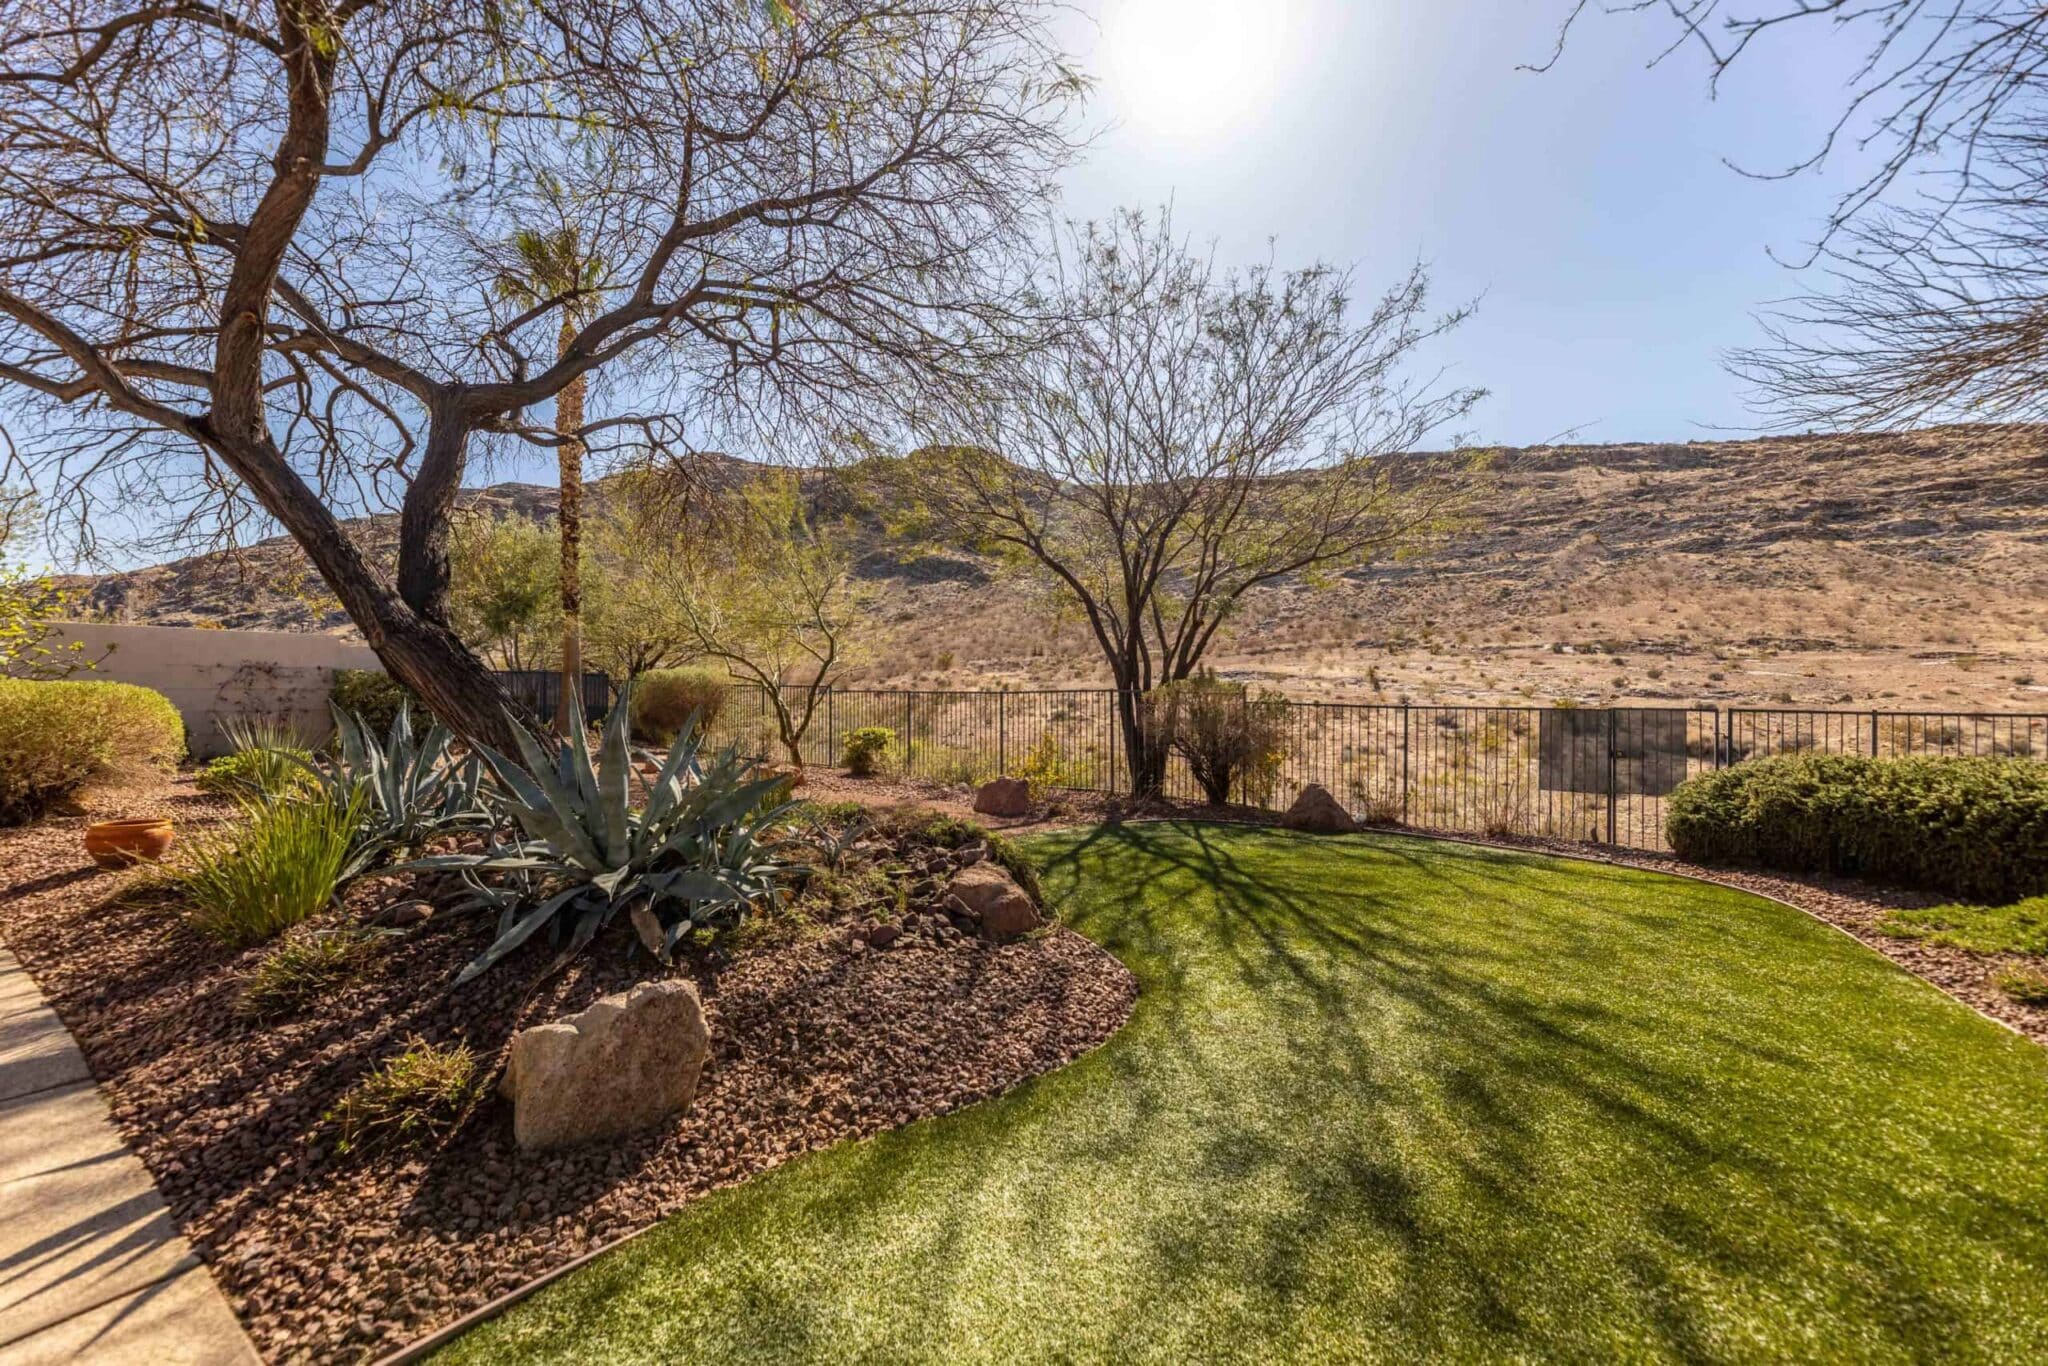 2355 green mountain court, las vegas, nevada, red rock country club